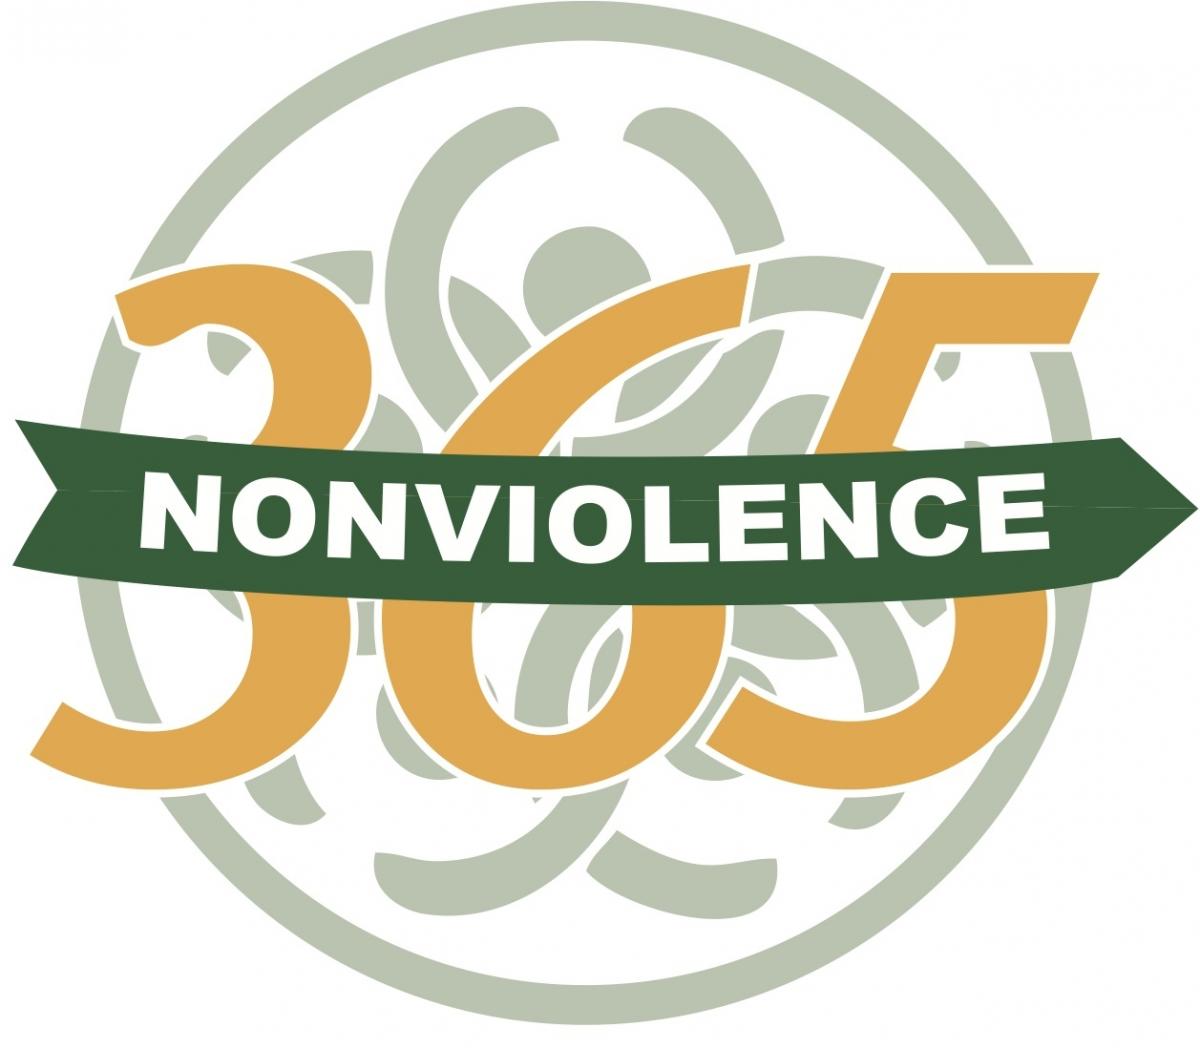 100 Days of Nonviolence